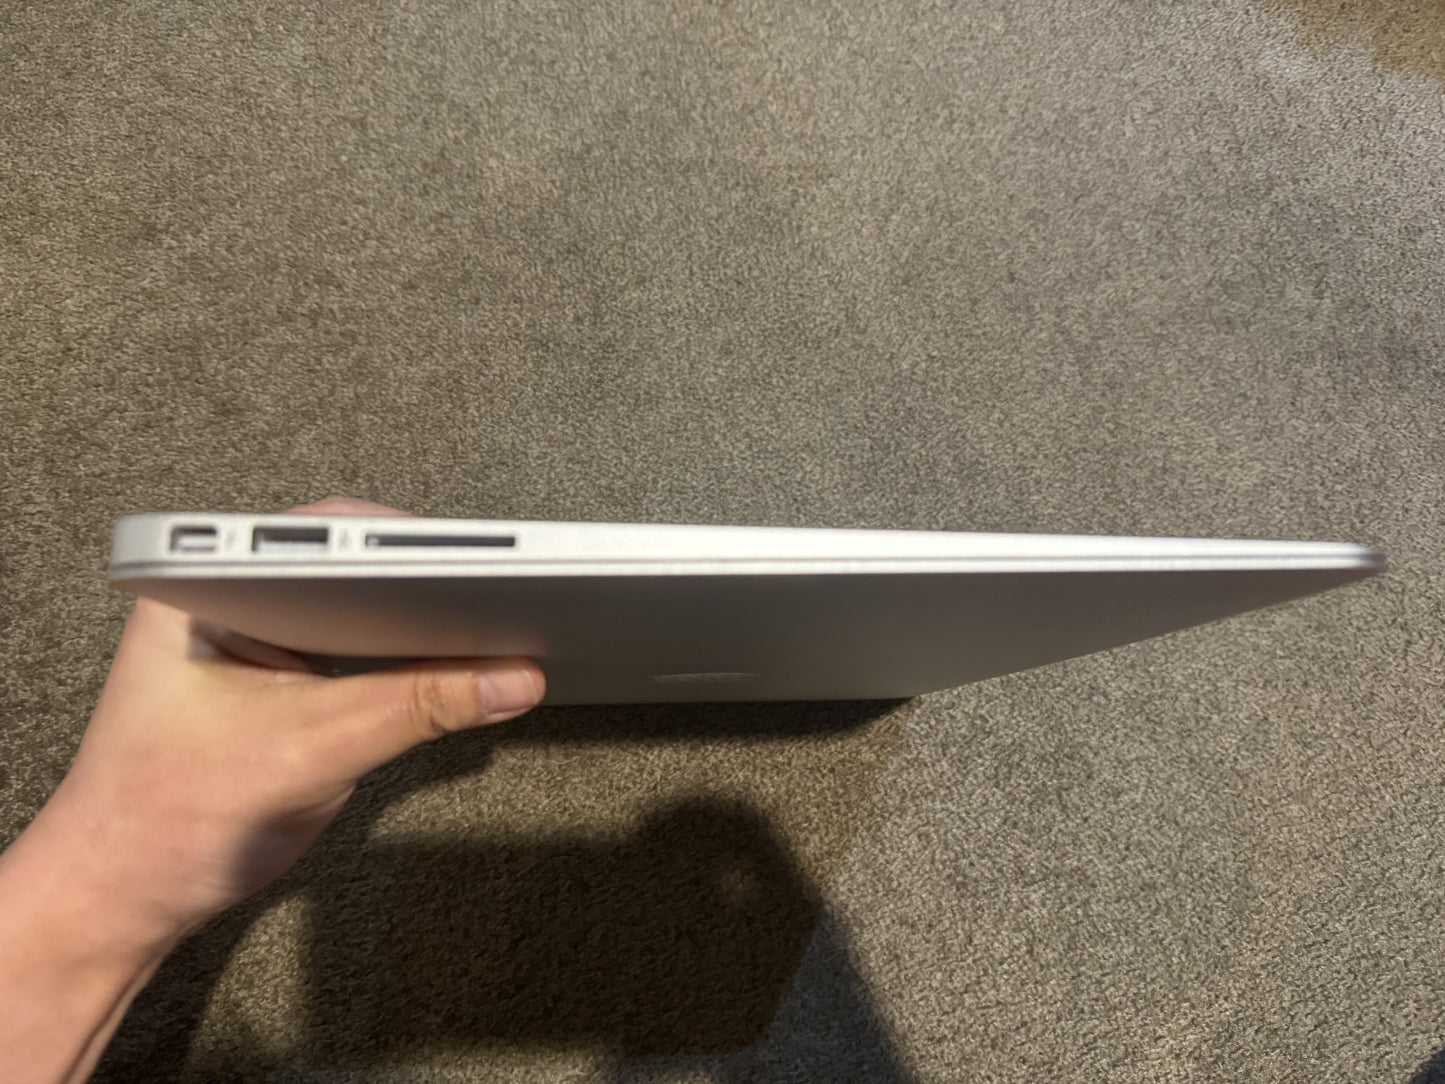 AS New 14 month old MacBook Air (M1, 2020) 8GB 256GB Battery 94%